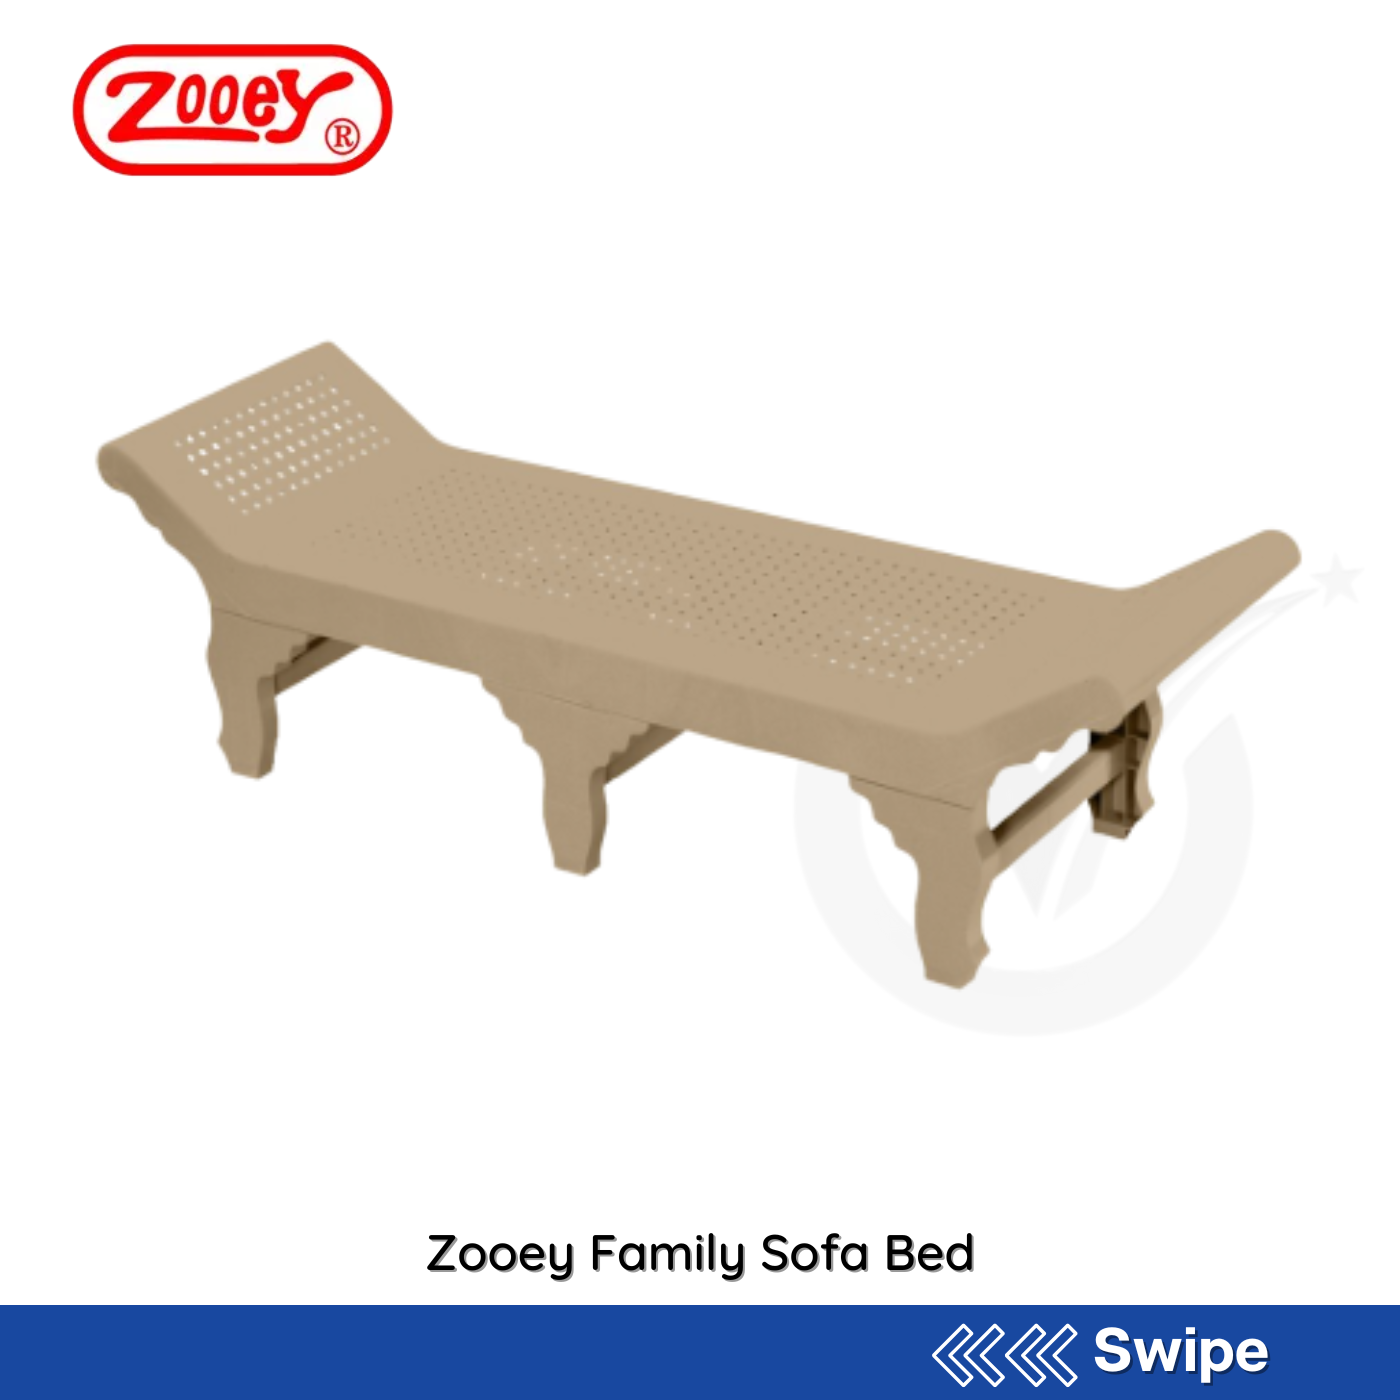 Zooey Family Sofa Bed - People's Choice Marketing